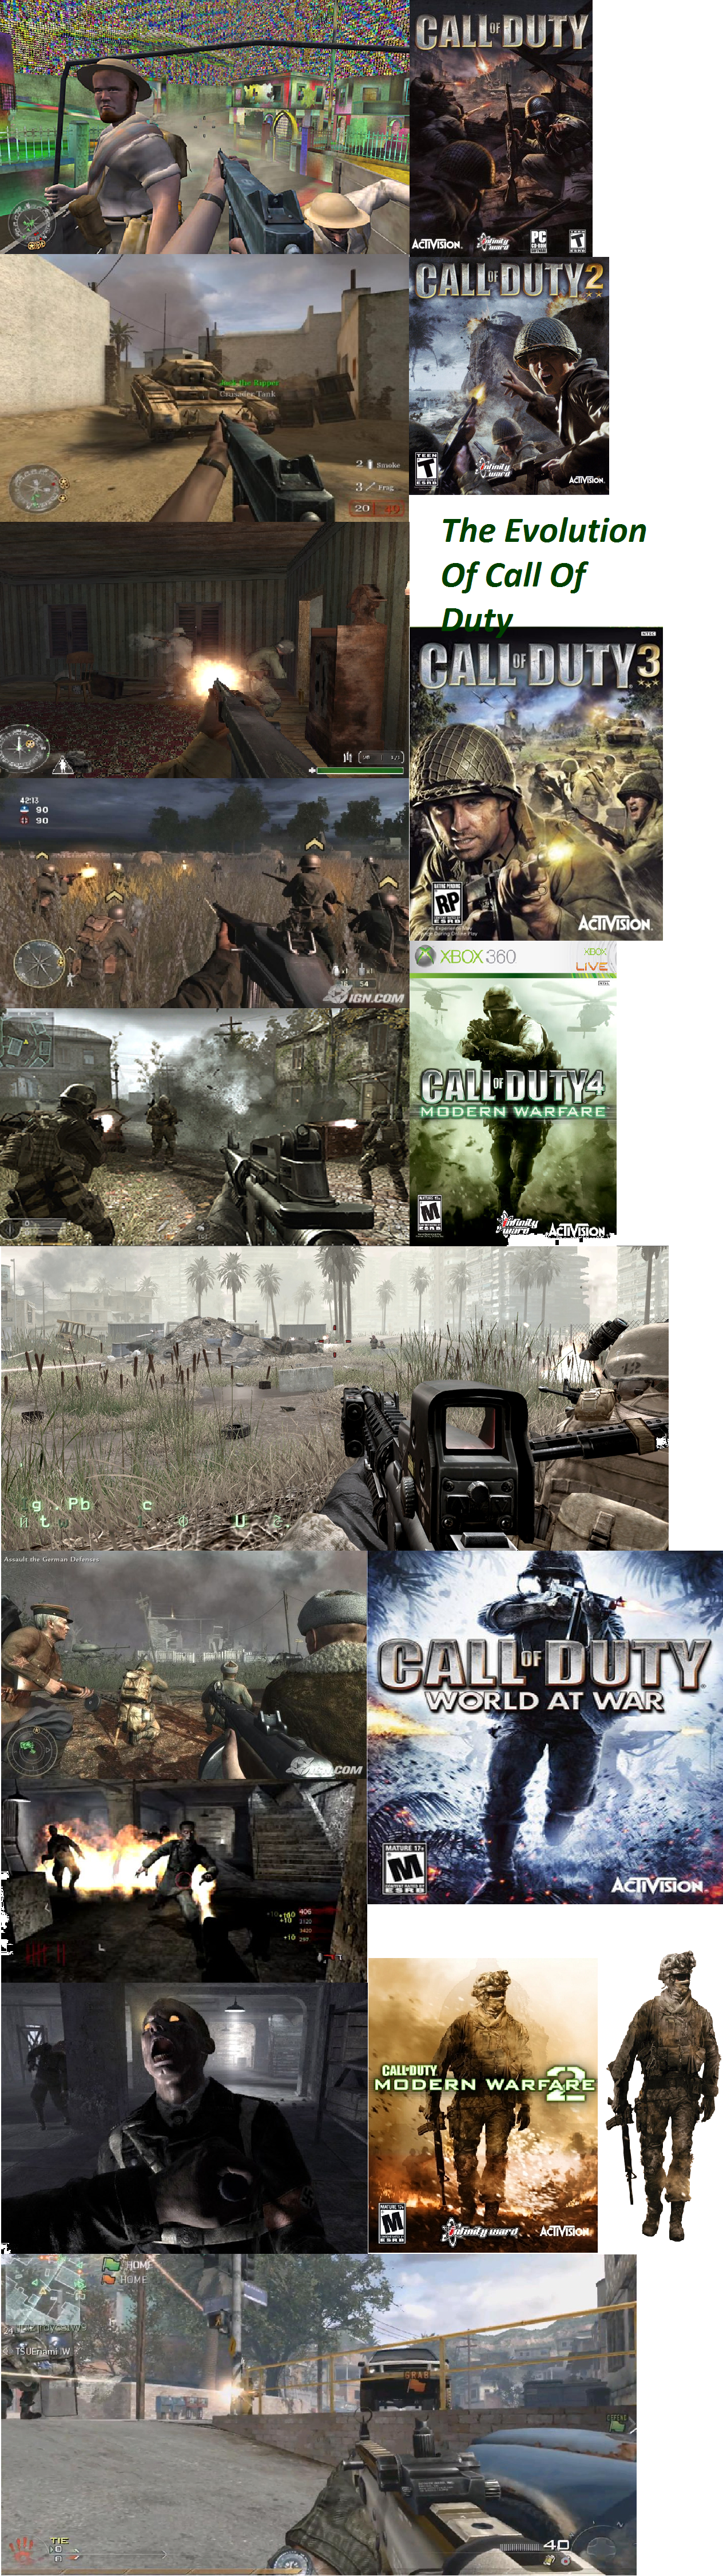 evolution of call of duty games